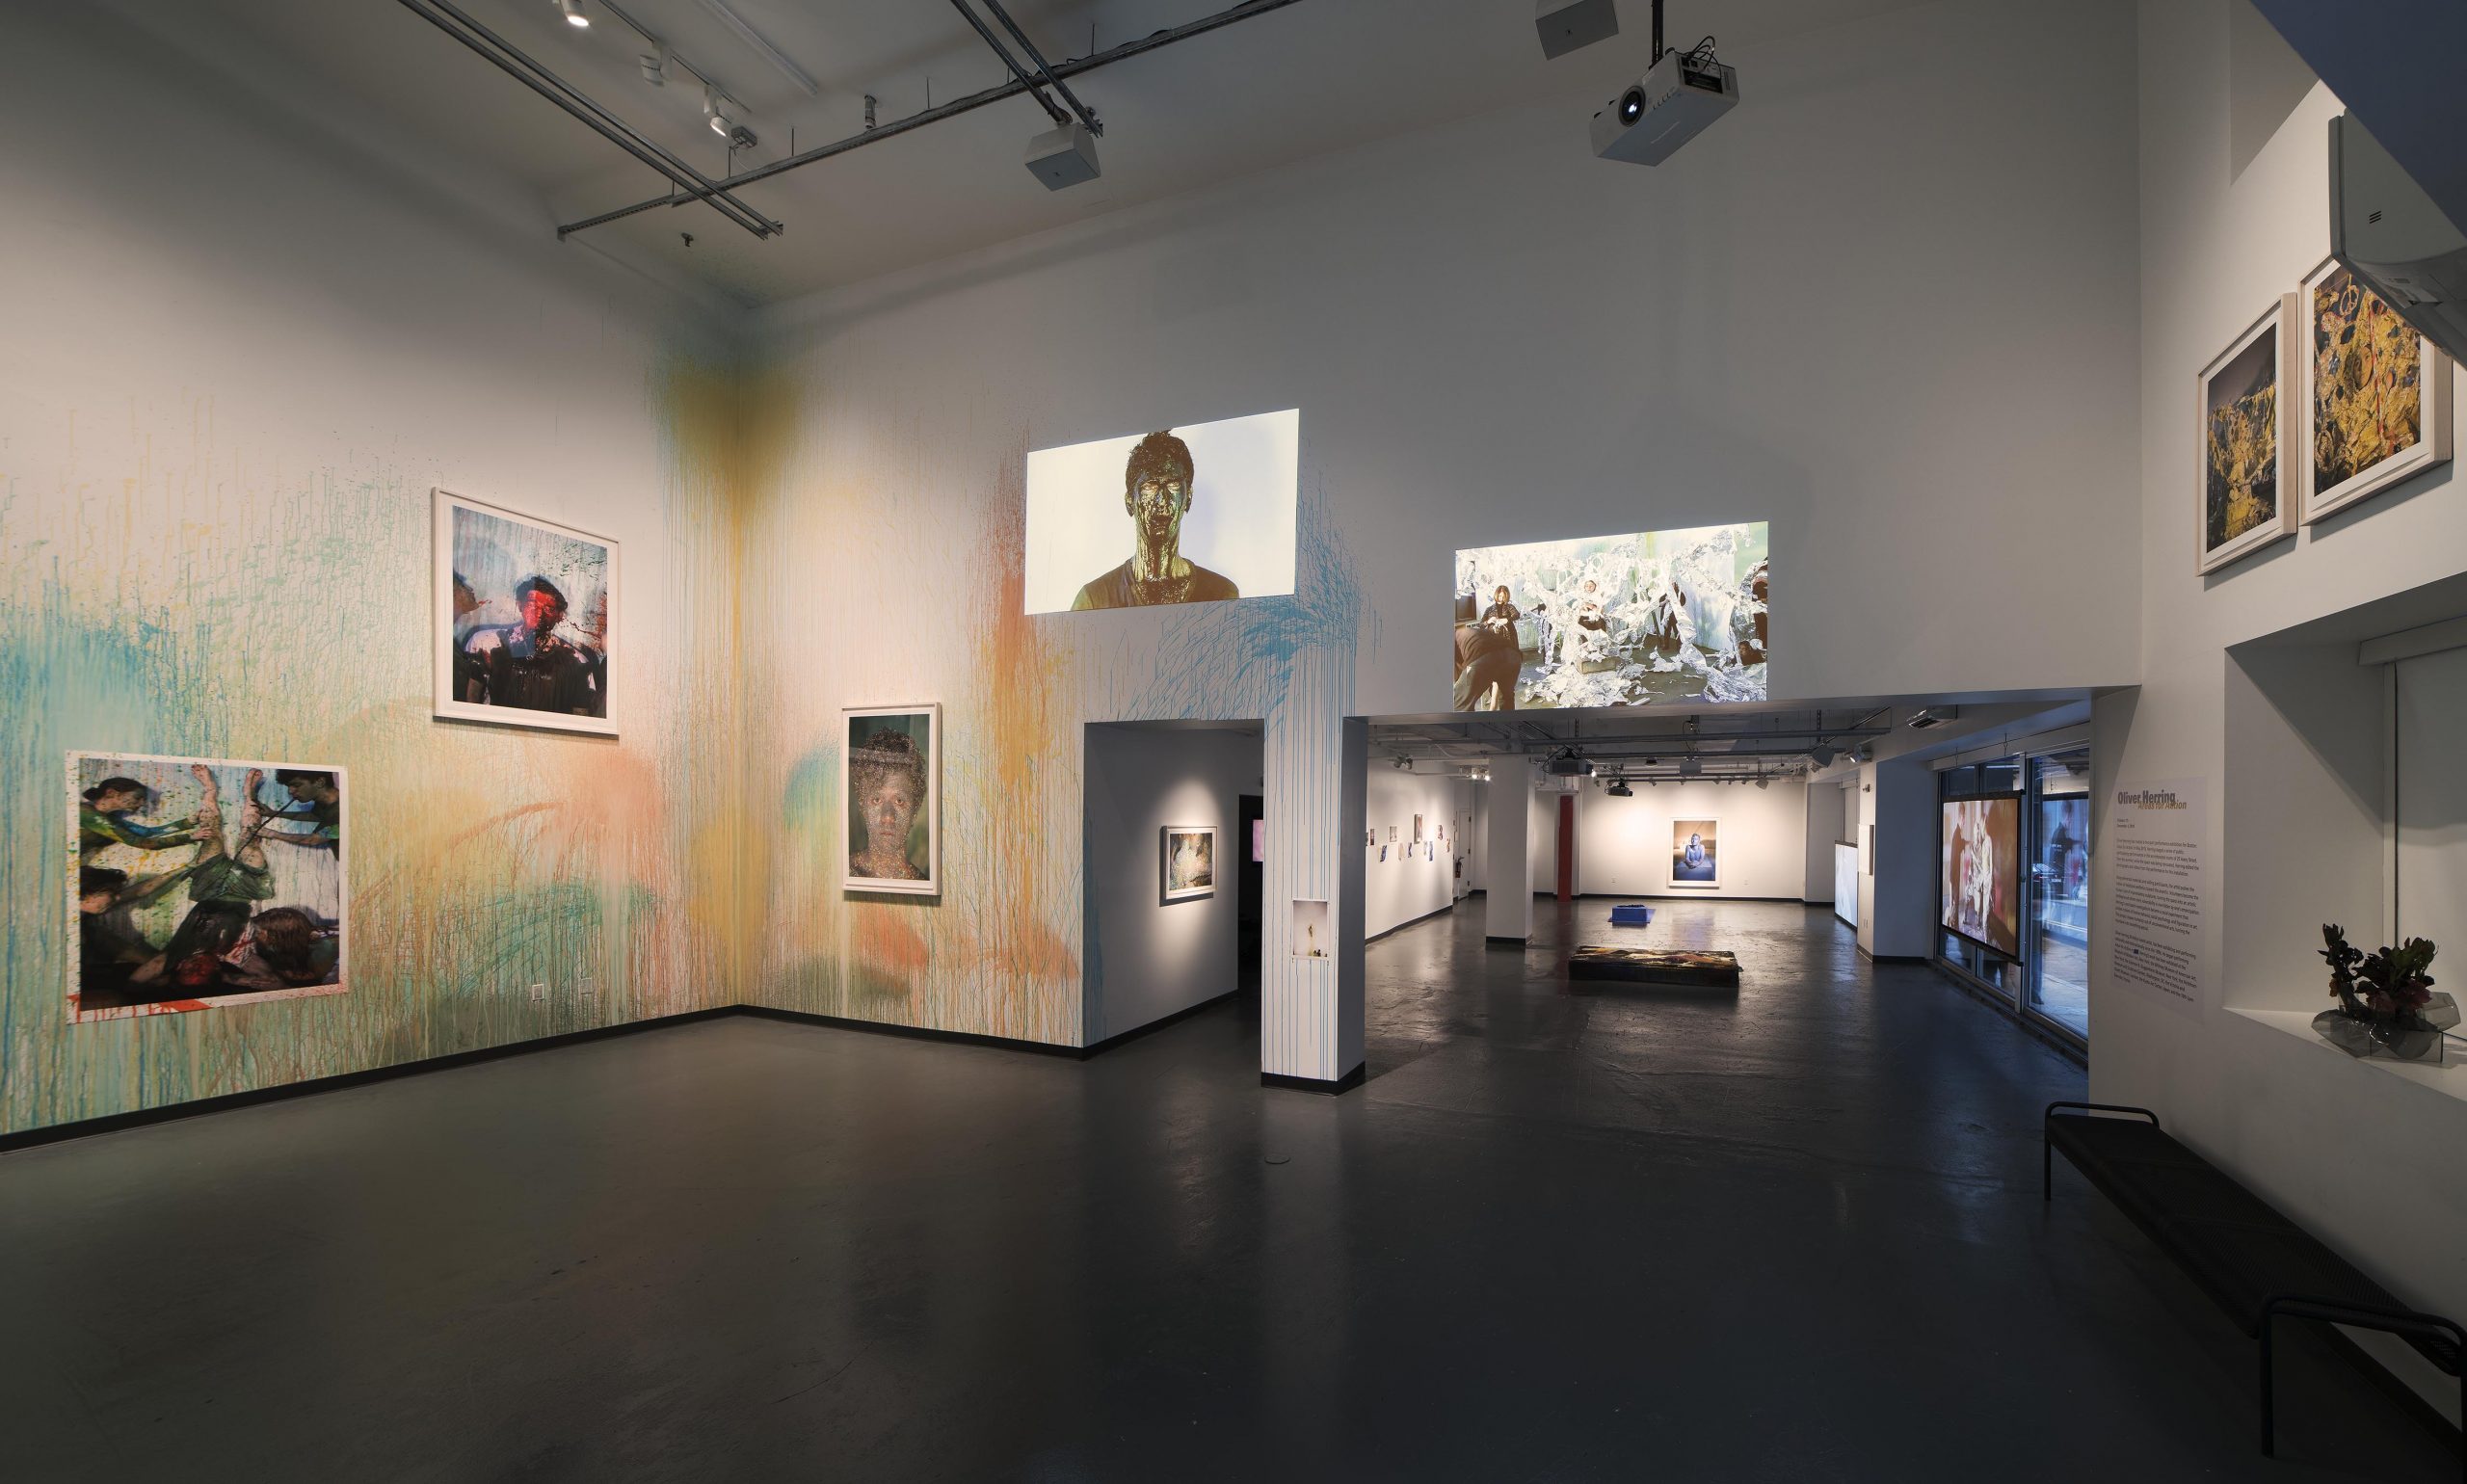 areas for action exhibit with paint covered walls and images of paint covered people